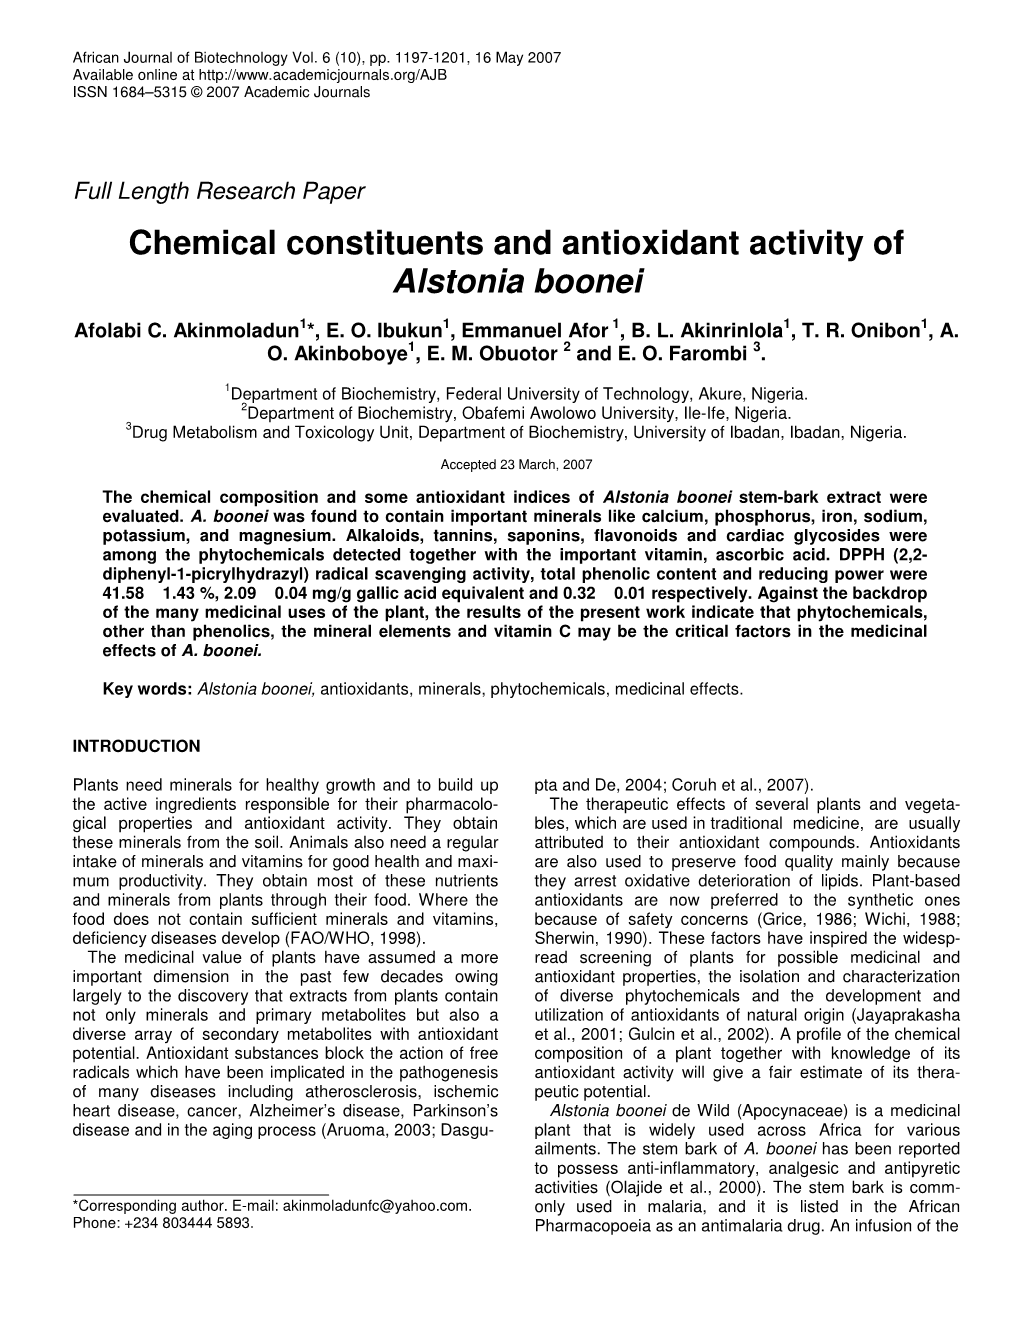 Chemical Constituents and Antioxidant Activity of Alstonia Boonei